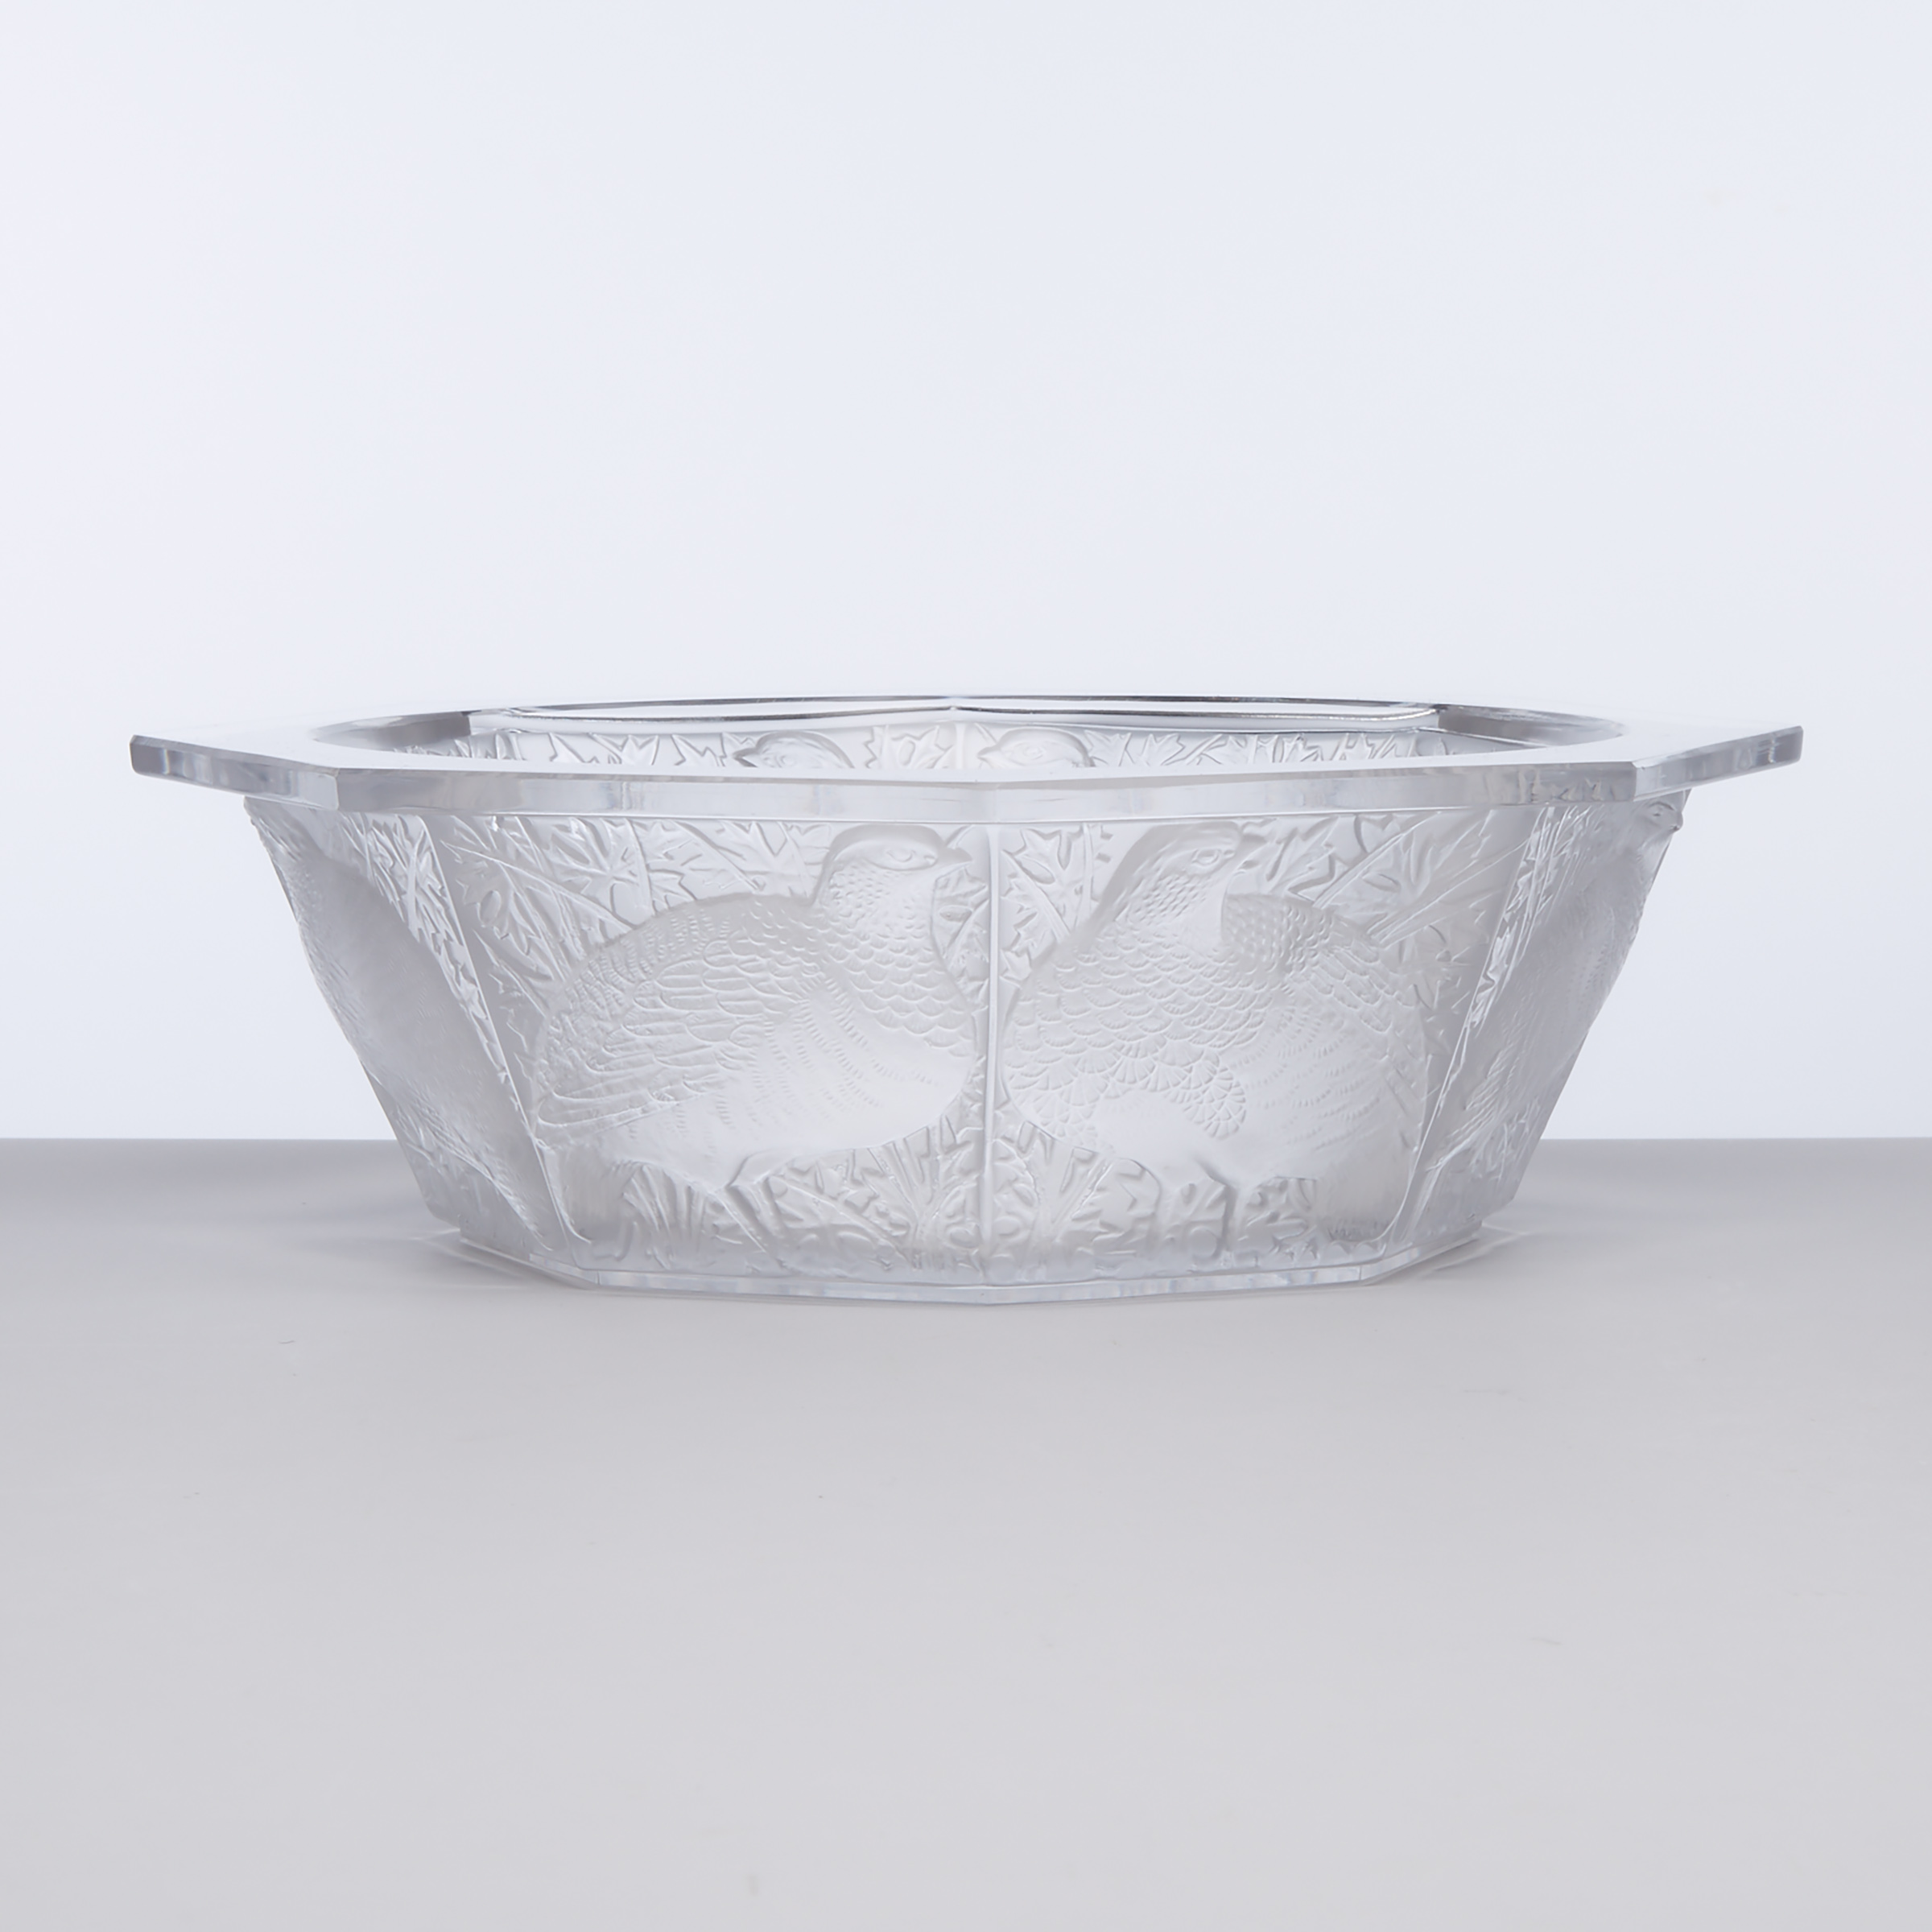 ‘Caille’, Lalique Frosted Octagonal Glass Bowl, post-1945